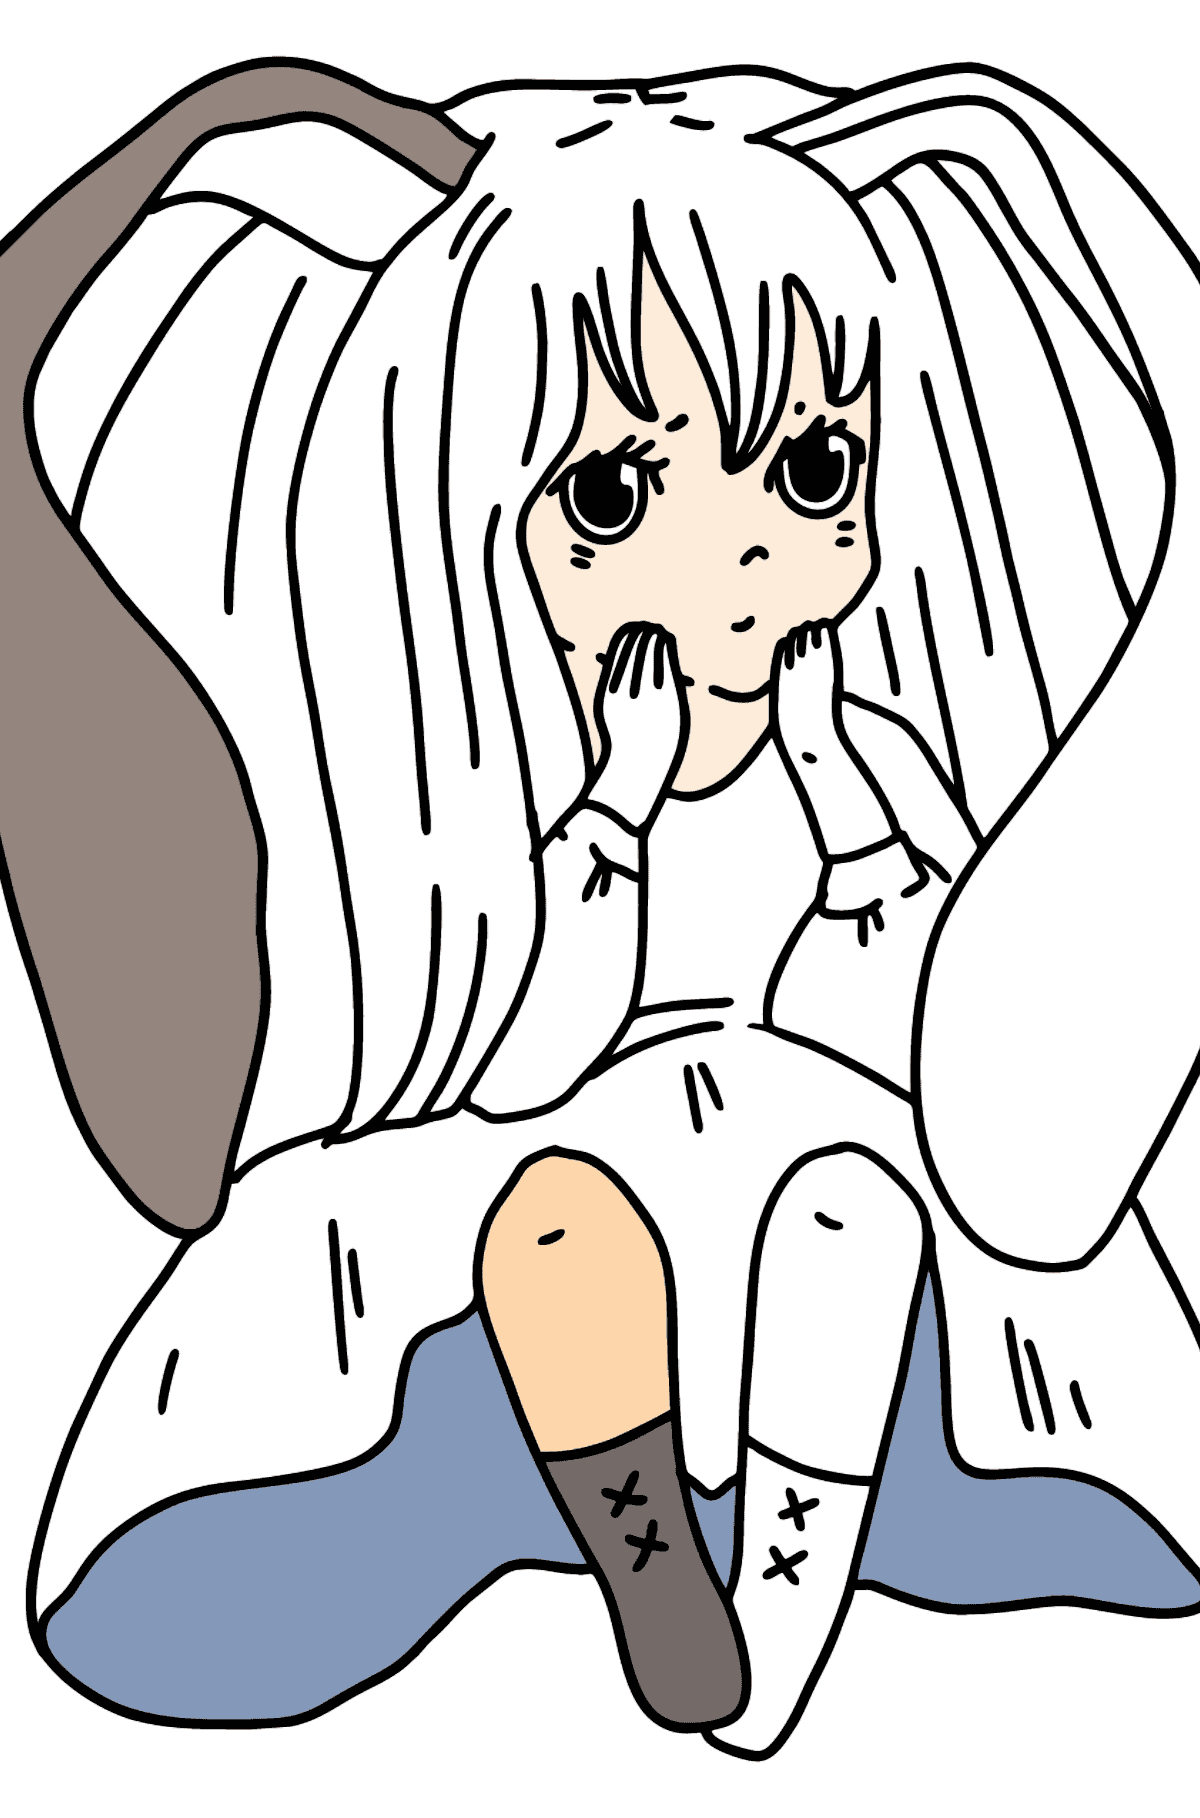 Coloring Book Anime Sad Rabbit Girl - Coloring Pages for Kids